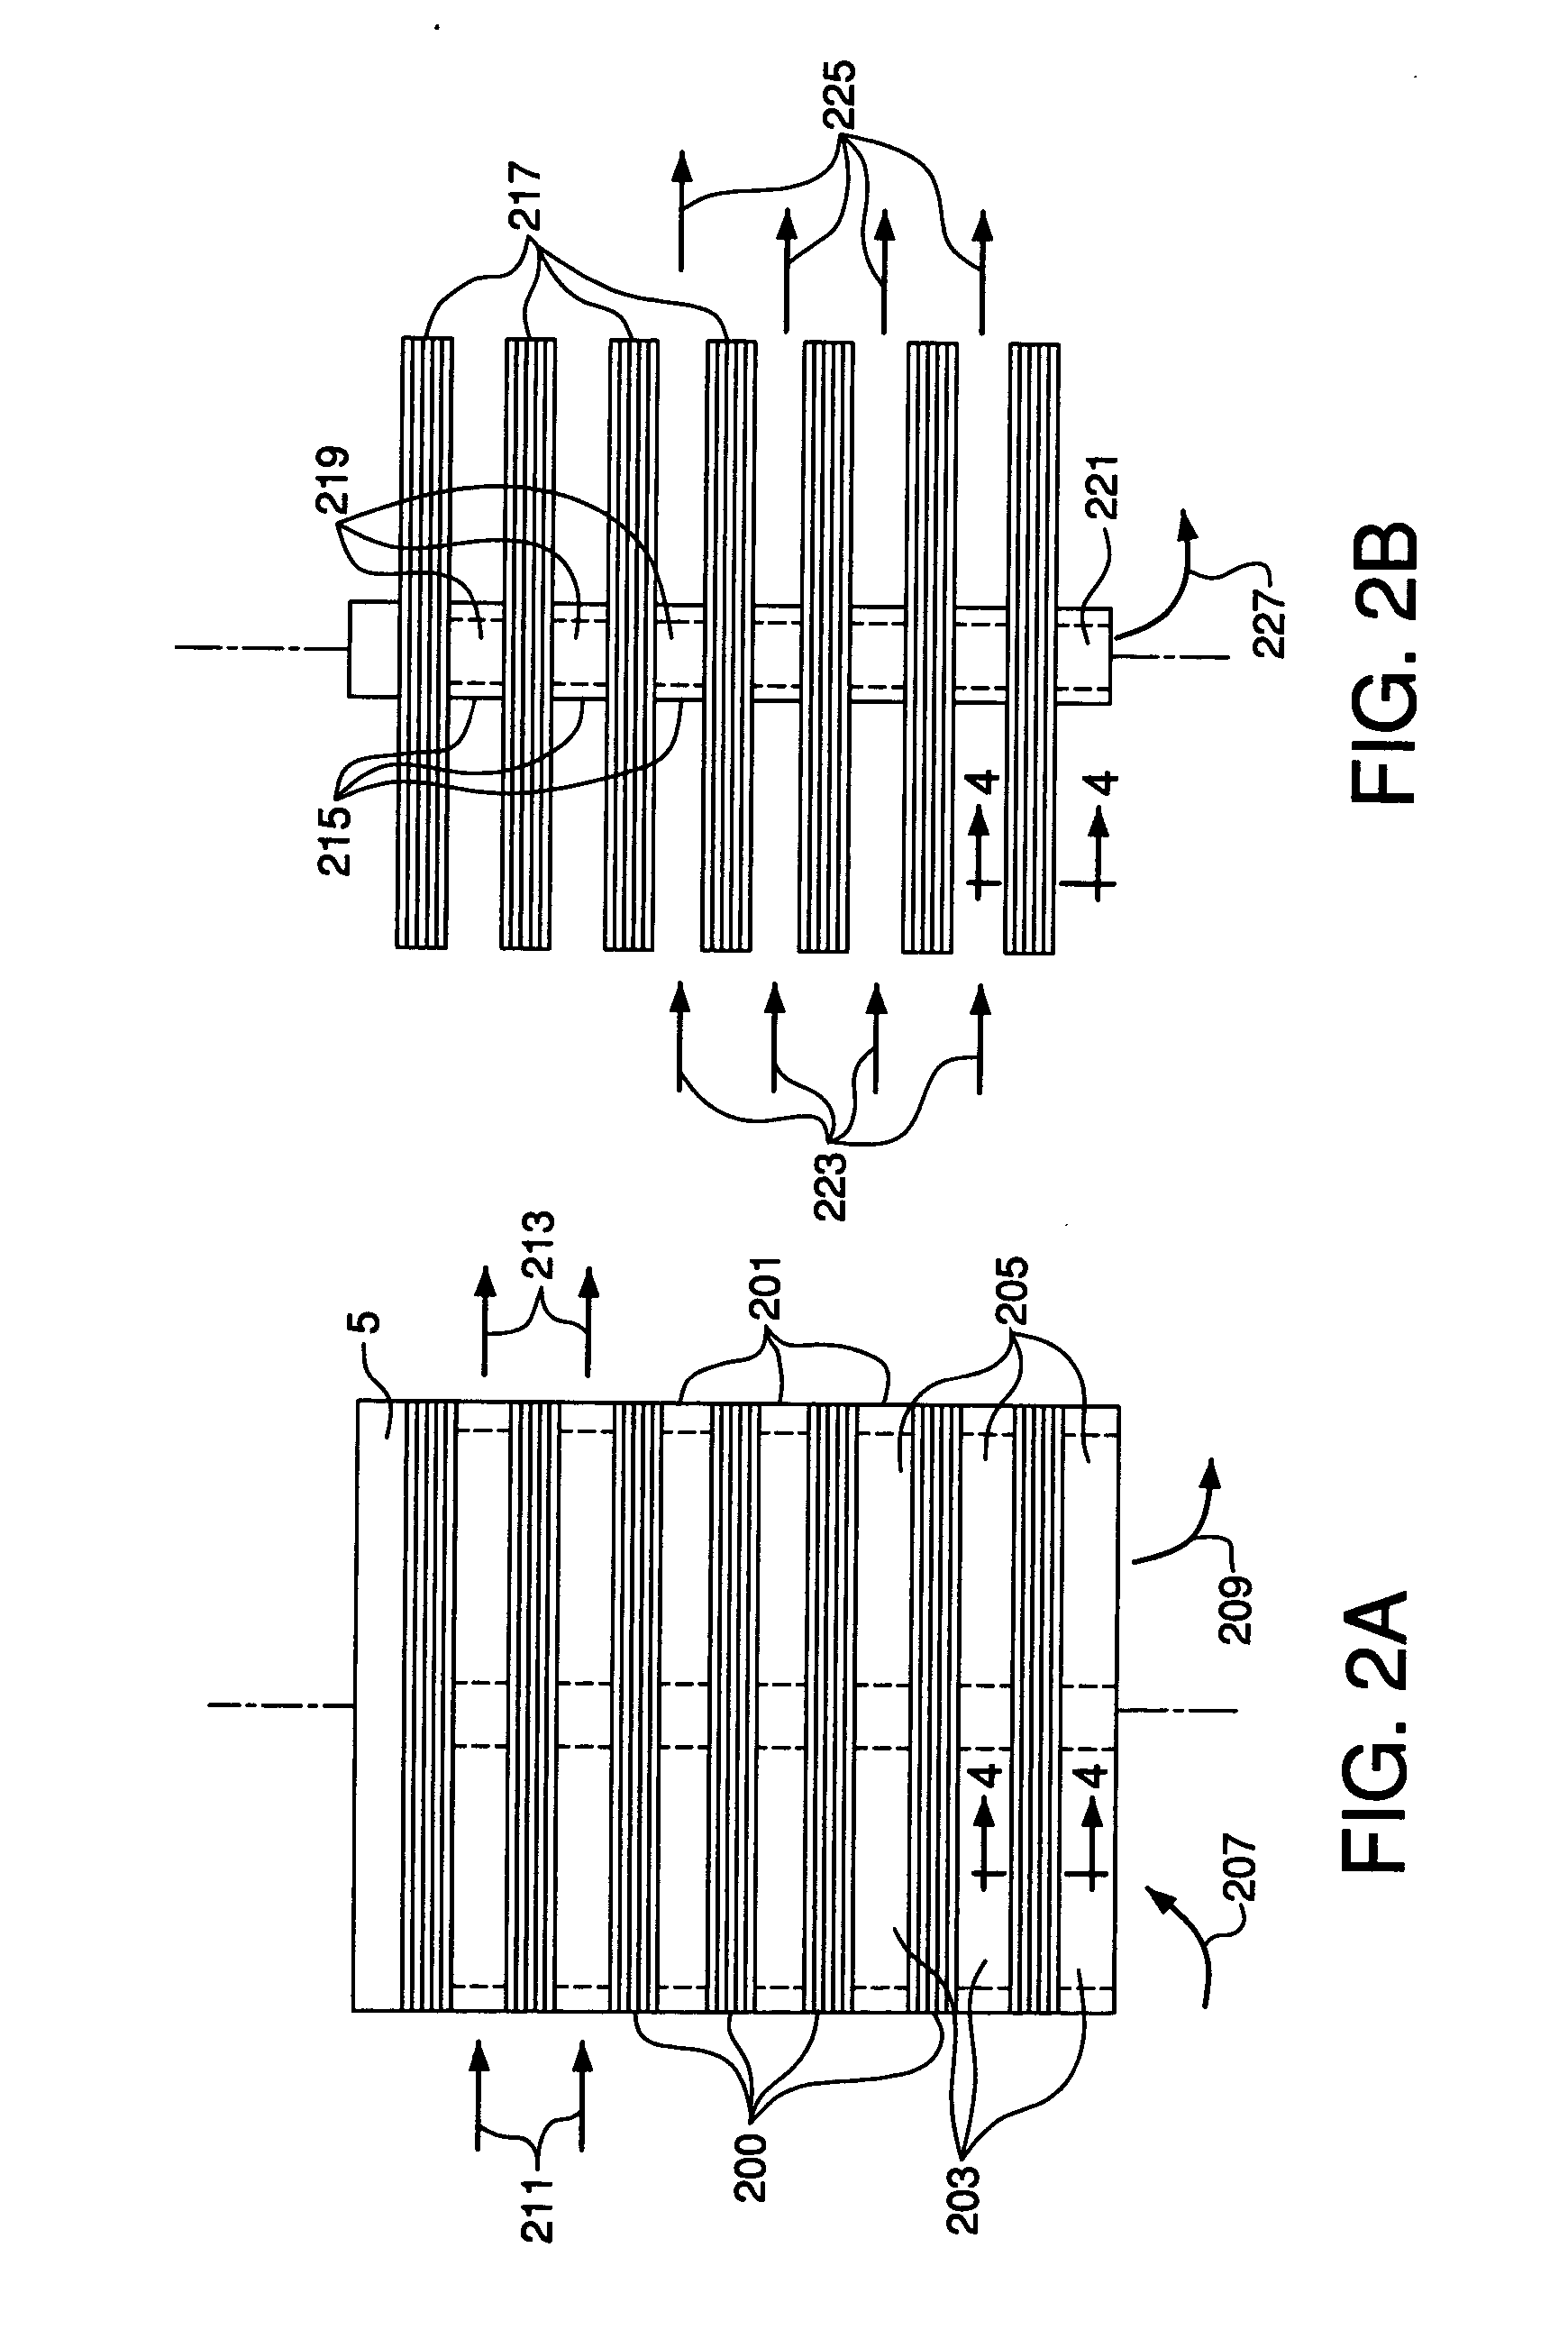 Ion transport membrane module and vessel system